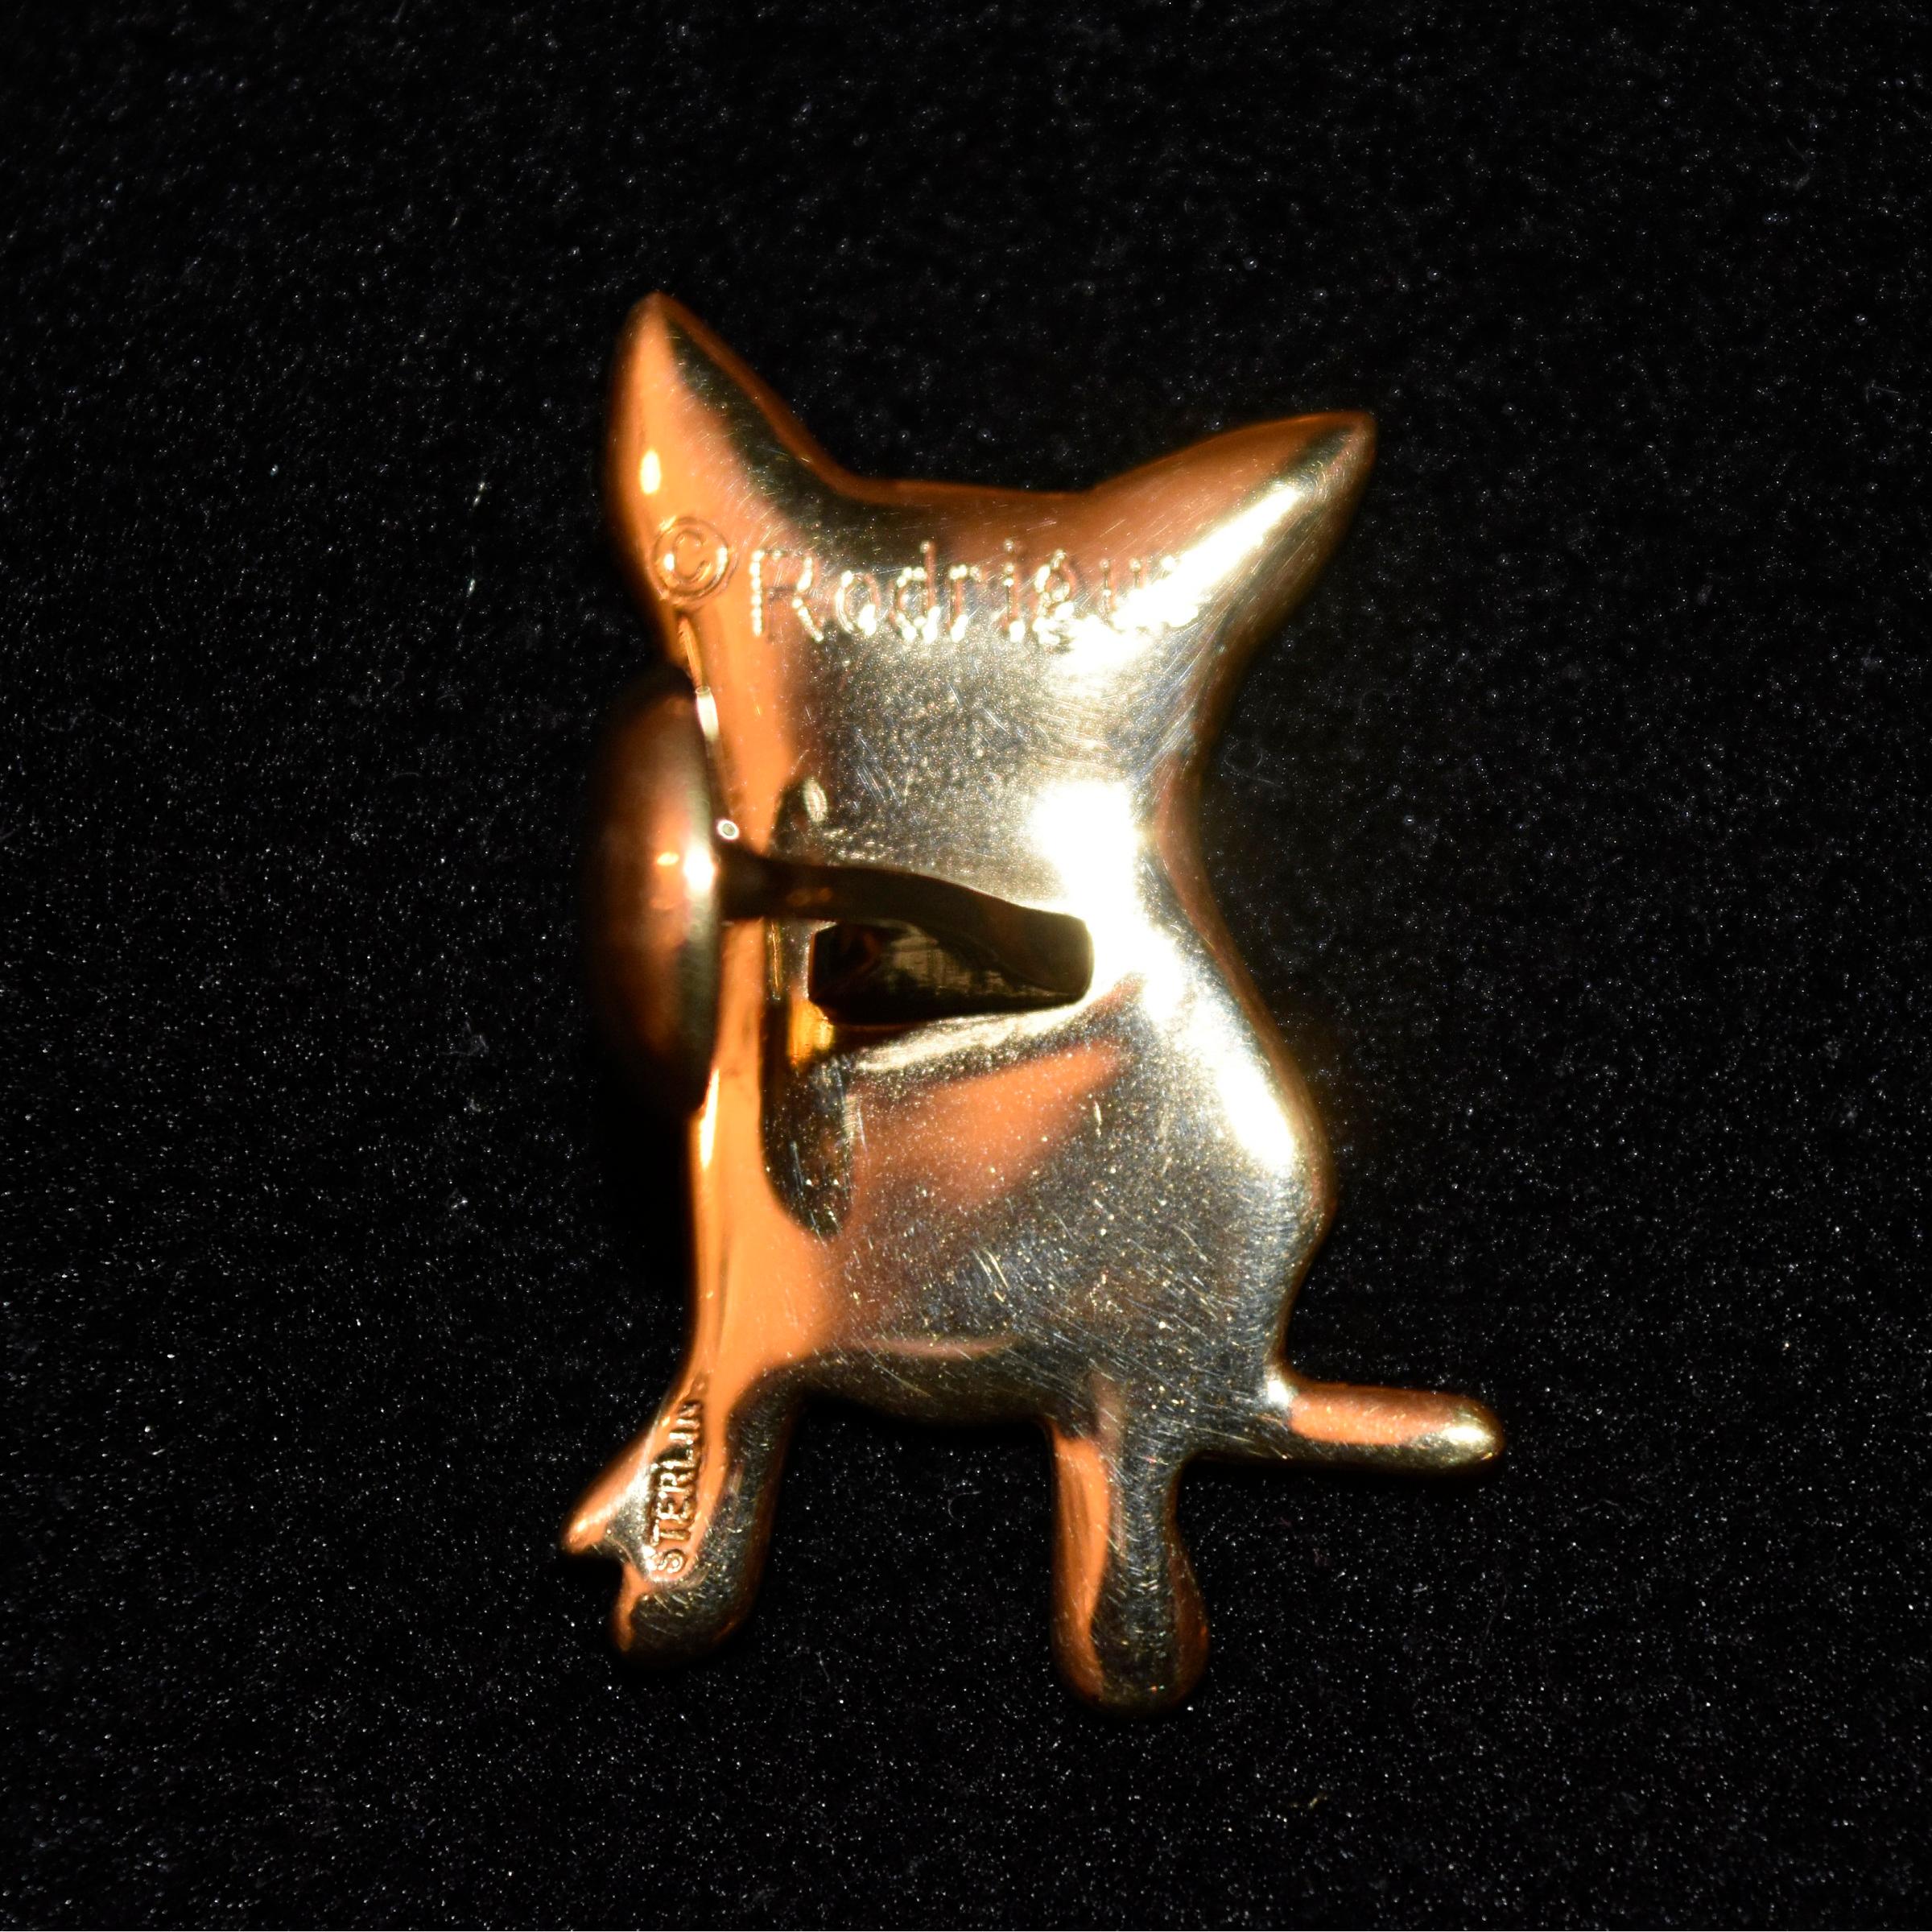 Artist:  George Rodrigue
Title:  Blue Dog Sterling/Gold Plated Cufflinks
Medium:  Foundry Jewelry
Date:  Circa 1993
Dimensions:  1 1/4